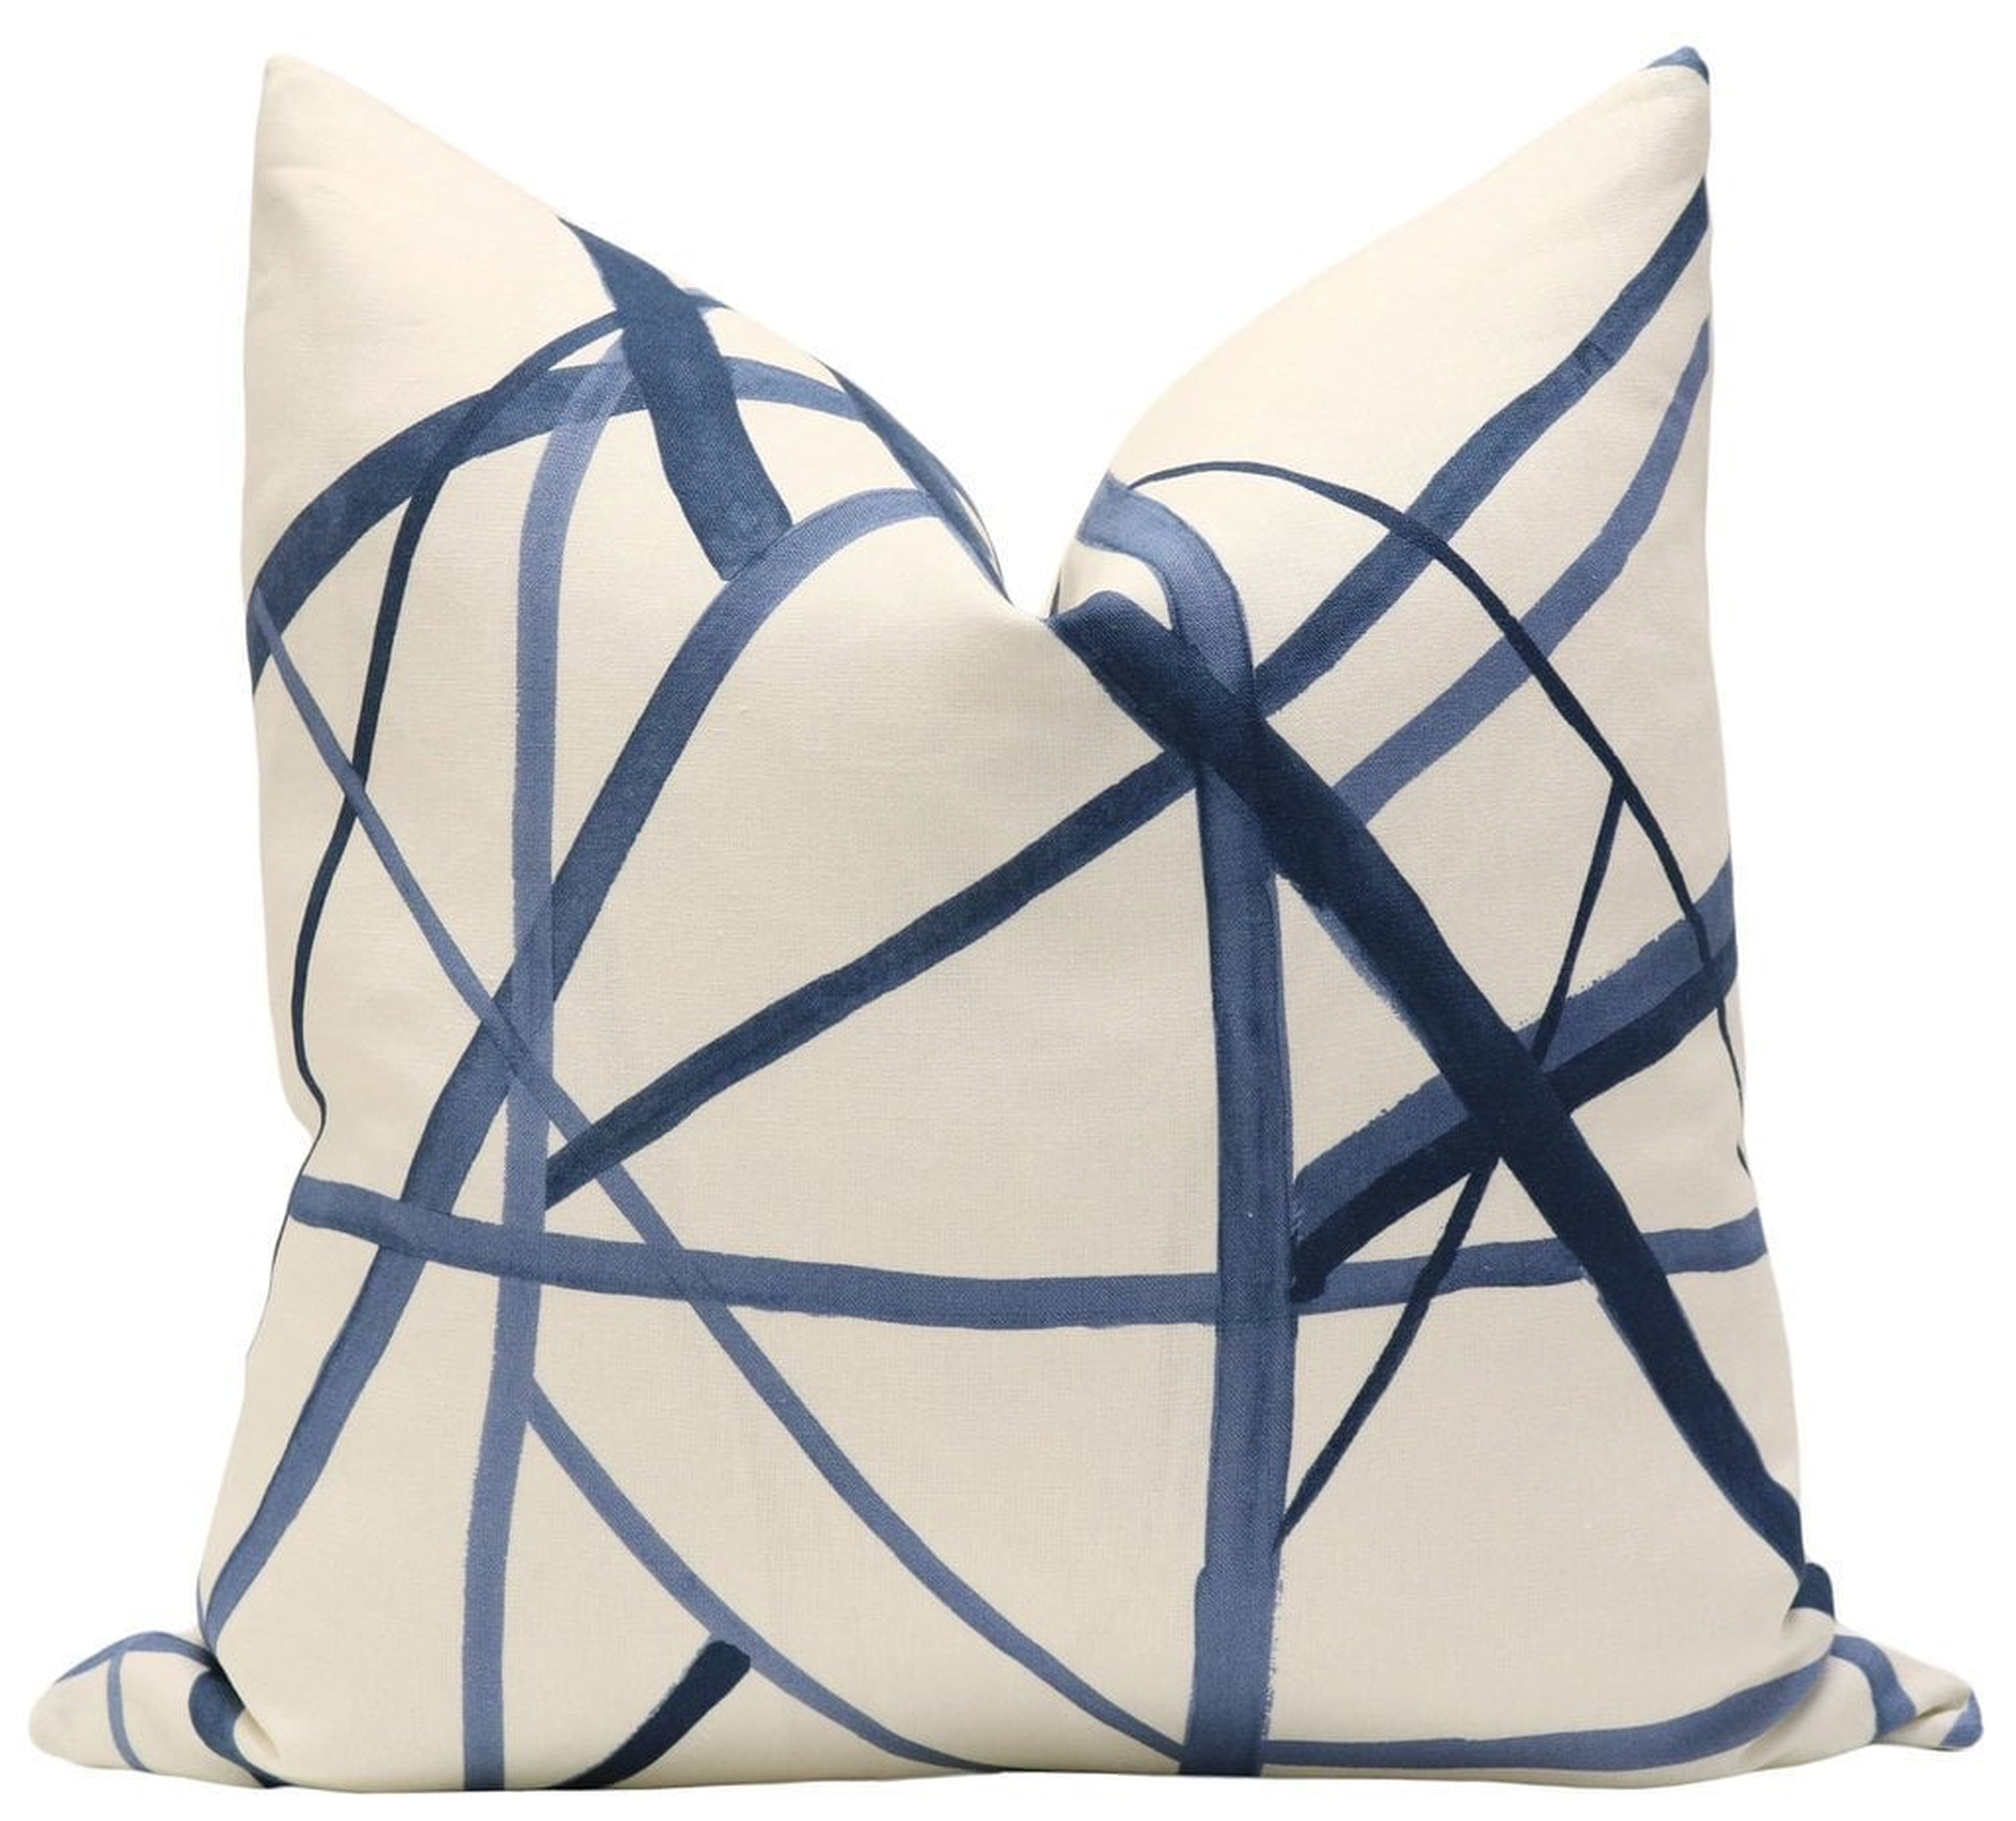 Channels // Periwinkle, pillow cover - 20"x20" - Little Design Company